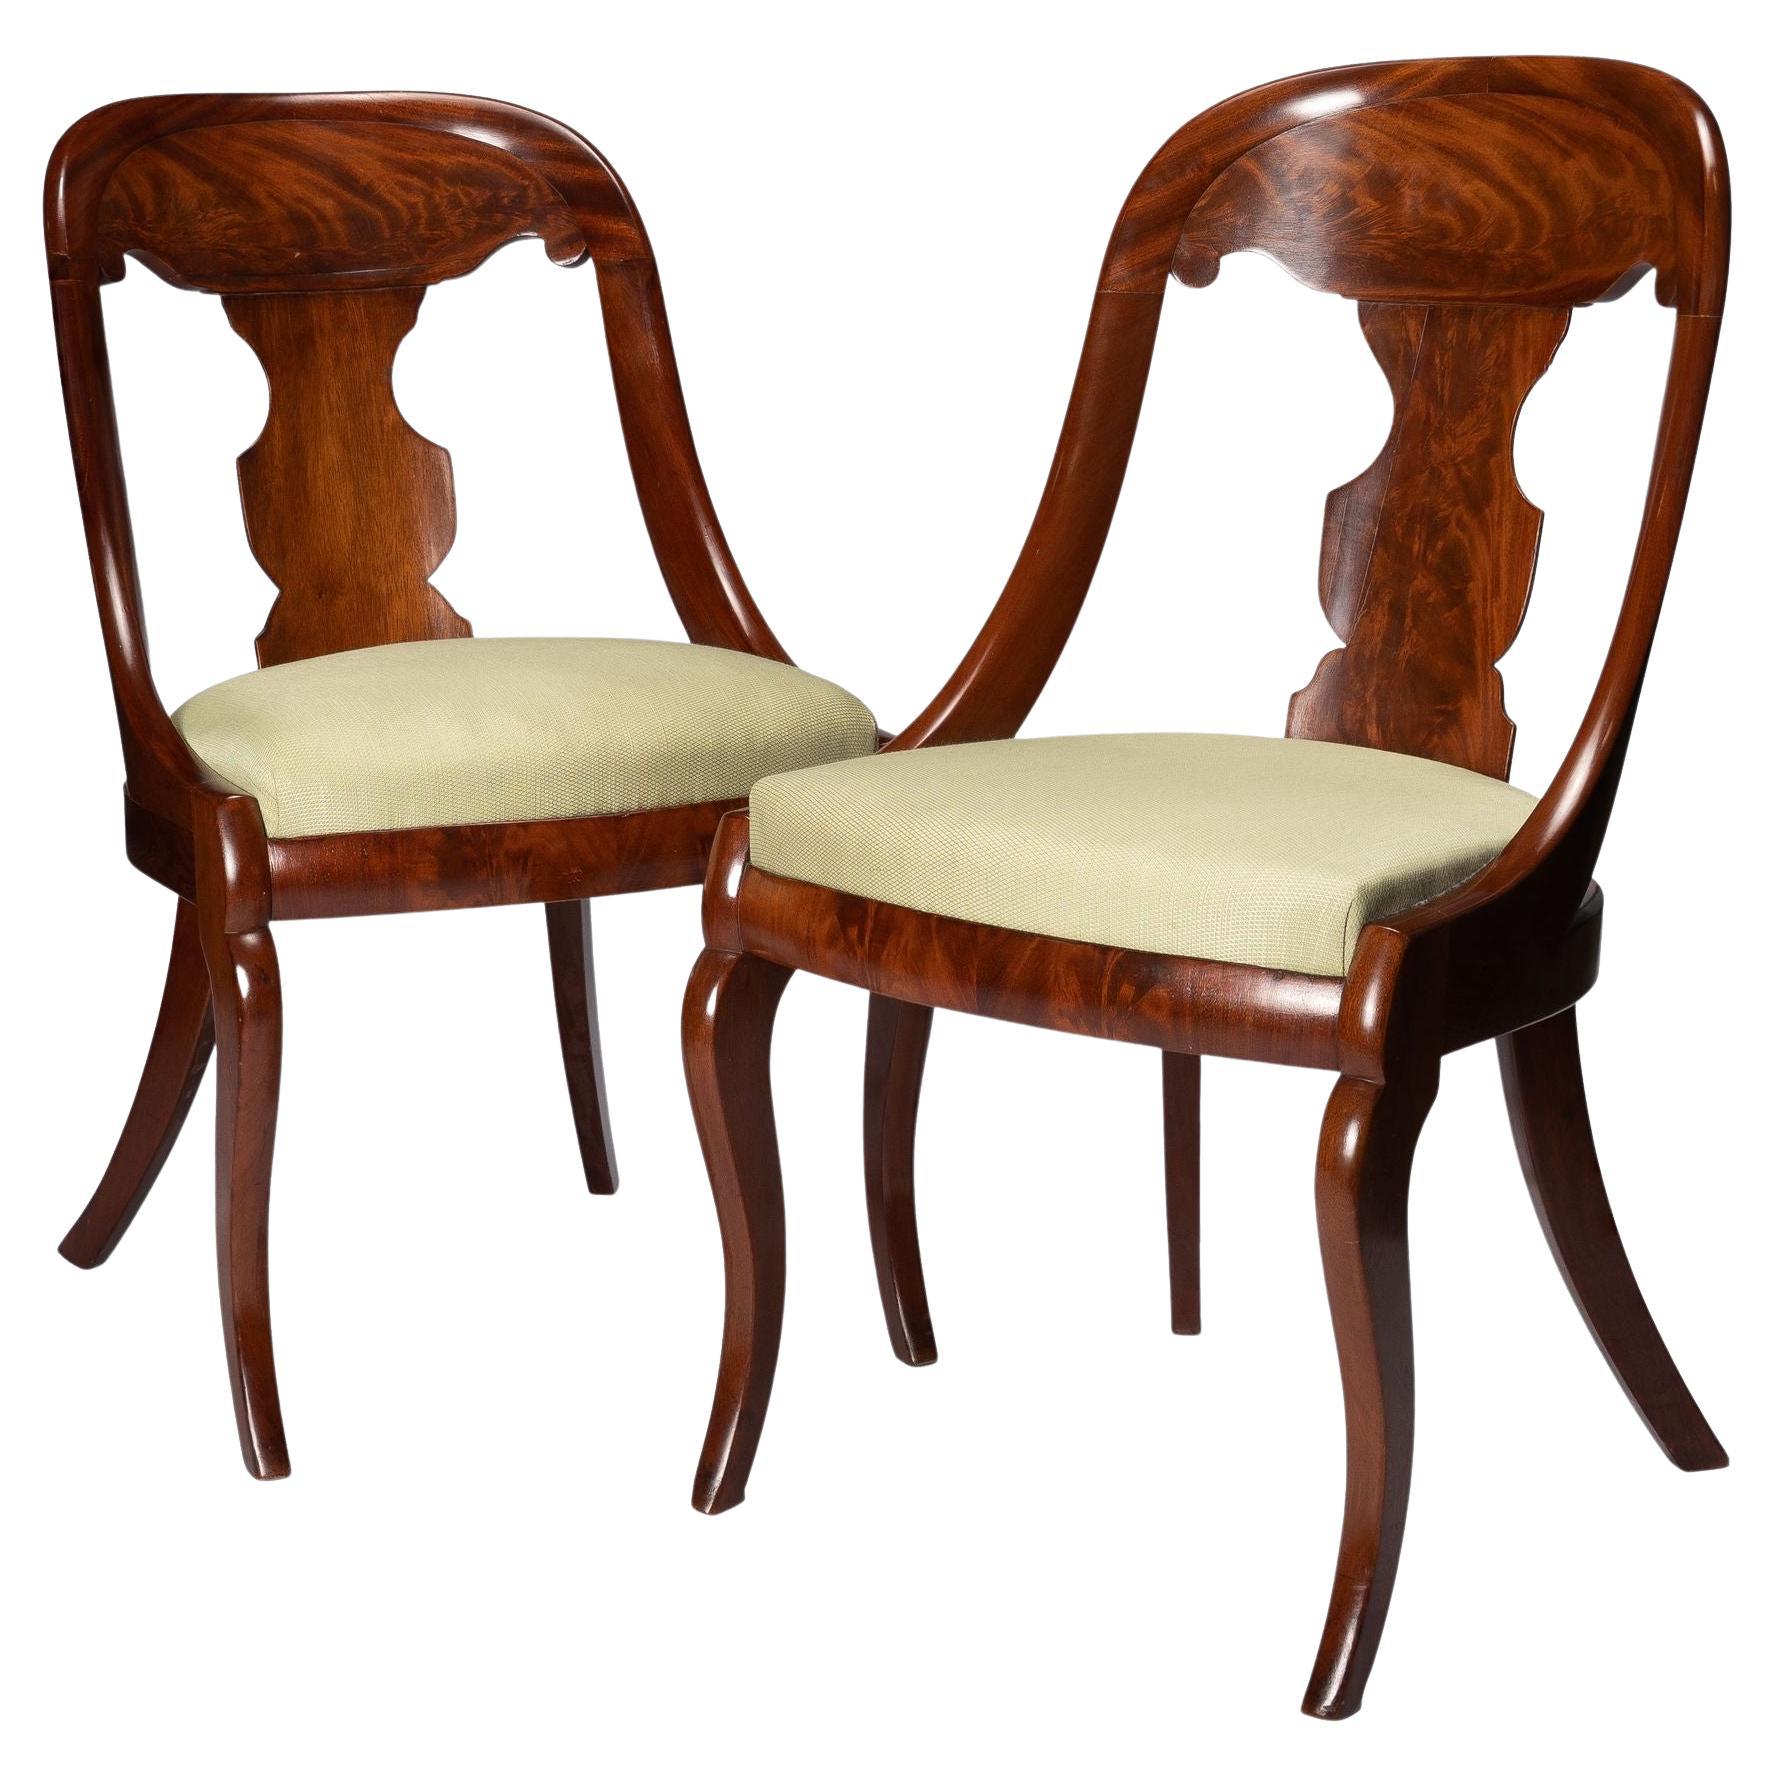 Pair of American Mahogany Gondola Chairs, 1815-35 For Sale